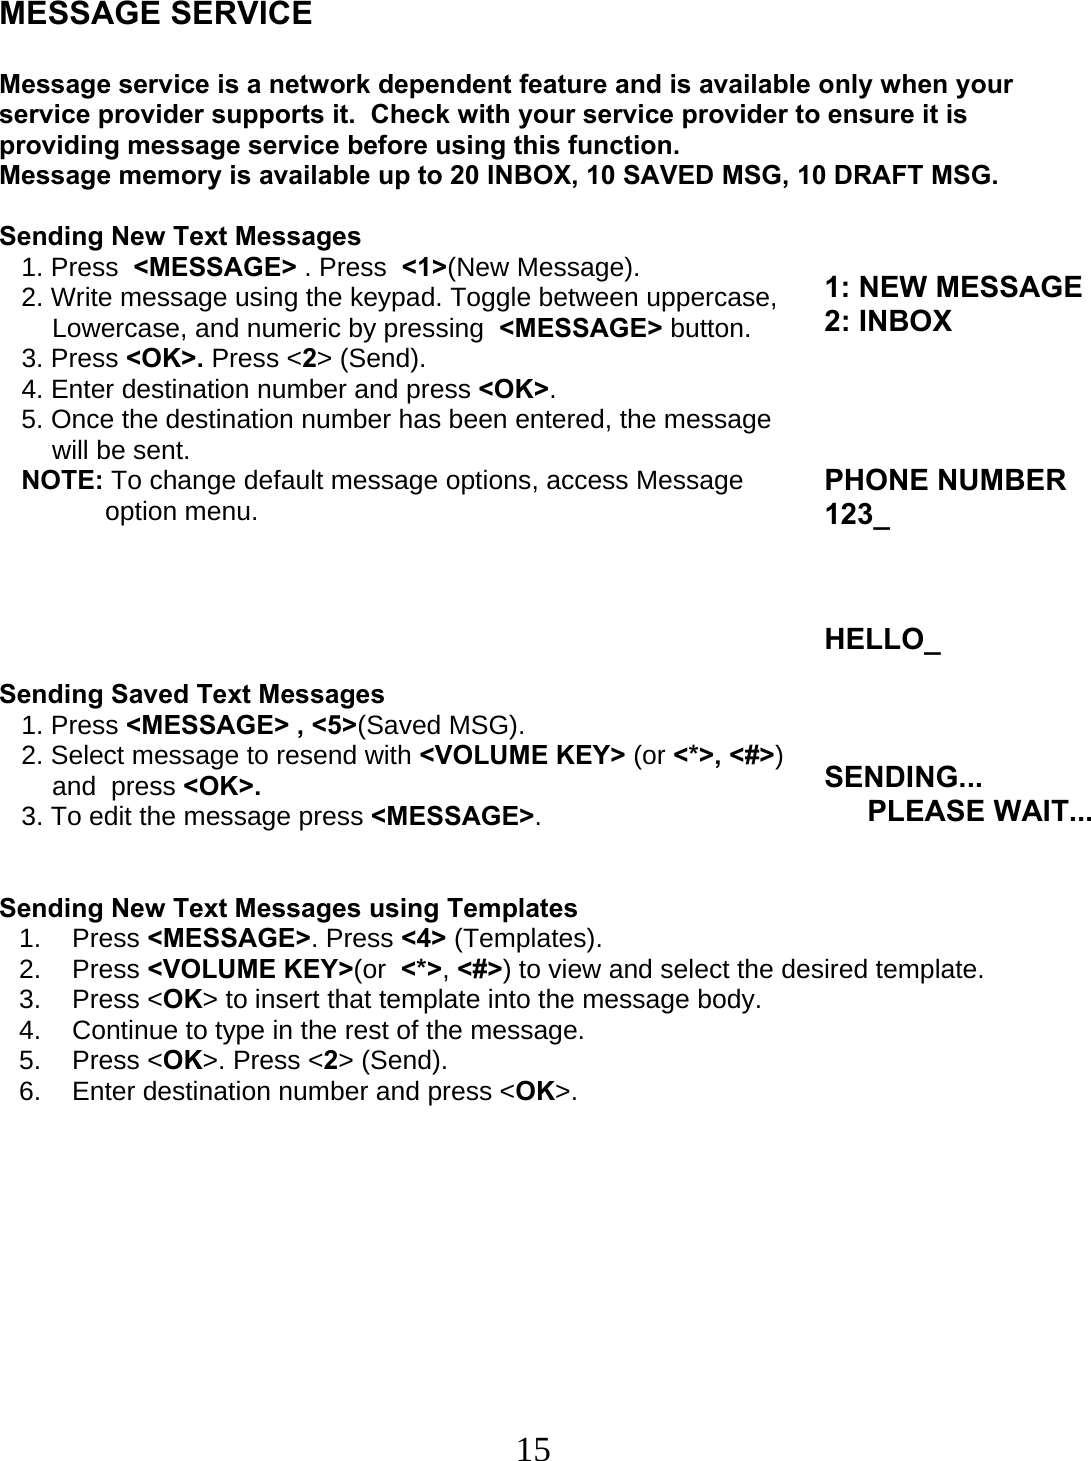  15    MESSAGE SERVICE  Message service is a network dependent feature and is available only when your service provider supports it.  Check with your service provider to ensure it is providing message service before using this function. Message memory is available up to 20 INBOX, 10 SAVED MSG, 10 DRAFT MSG.   Sending New Text Messages    1. Press  &lt;MESSAGE&gt; . Press  &lt;1&gt;(New Message).    2. Write message using the keypad. Toggle between uppercase,  Lowercase, and numeric by pressing  &lt;MESSAGE&gt; button.    3. Press &lt;OK&gt;. Press &lt;2&gt; (Send).    4. Enter destination number and press &lt;OK&gt;.    5. Once the destination number has been entered, the message  will be sent.    NOTE: To change default message options, access Message  option menu.      Sending Saved Text Messages    1. Press &lt;MESSAGE&gt; , &lt;5&gt;(Saved MSG).    2. Select message to resend with &lt;VOLUME KEY&gt; (or &lt;*&gt;, &lt;#&gt;)  and  press &lt;OK&gt;.    3. To edit the message press &lt;MESSAGE&gt;.   Sending New Text Messages using Templates 1. Press &lt;MESSAGE&gt;. Press &lt;4&gt; (Templates). 2. Press &lt;VOLUME KEY&gt;(or  &lt;*&gt;, &lt;#&gt;) to view and select the desired template. 3. Press &lt;OK&gt; to insert that template into the message body. 4.  Continue to type in the rest of the message. 5. Press &lt;OK&gt;. Press &lt;2&gt; (Send). 6.  Enter destination number and press &lt;OK&gt;.           1: NEW MESSAGE 2: INBOXPHONE NUMBER123_ HELLO_SENDING... PLEASE WAIT...